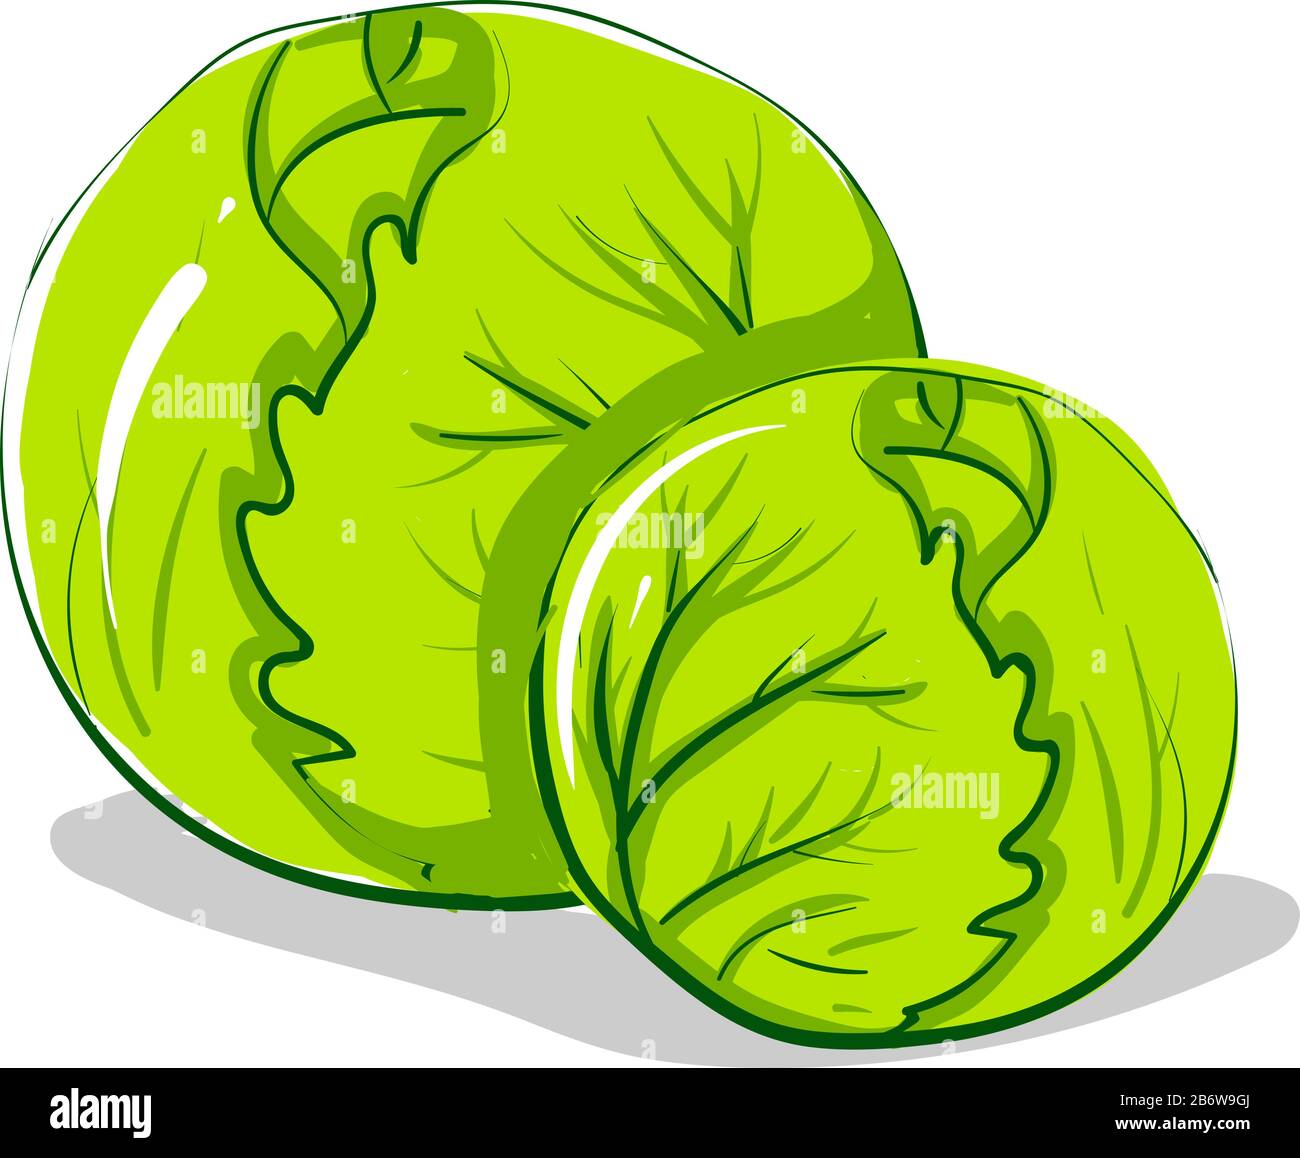 Two cabbages, illustration, vector on white background. Stock Vector